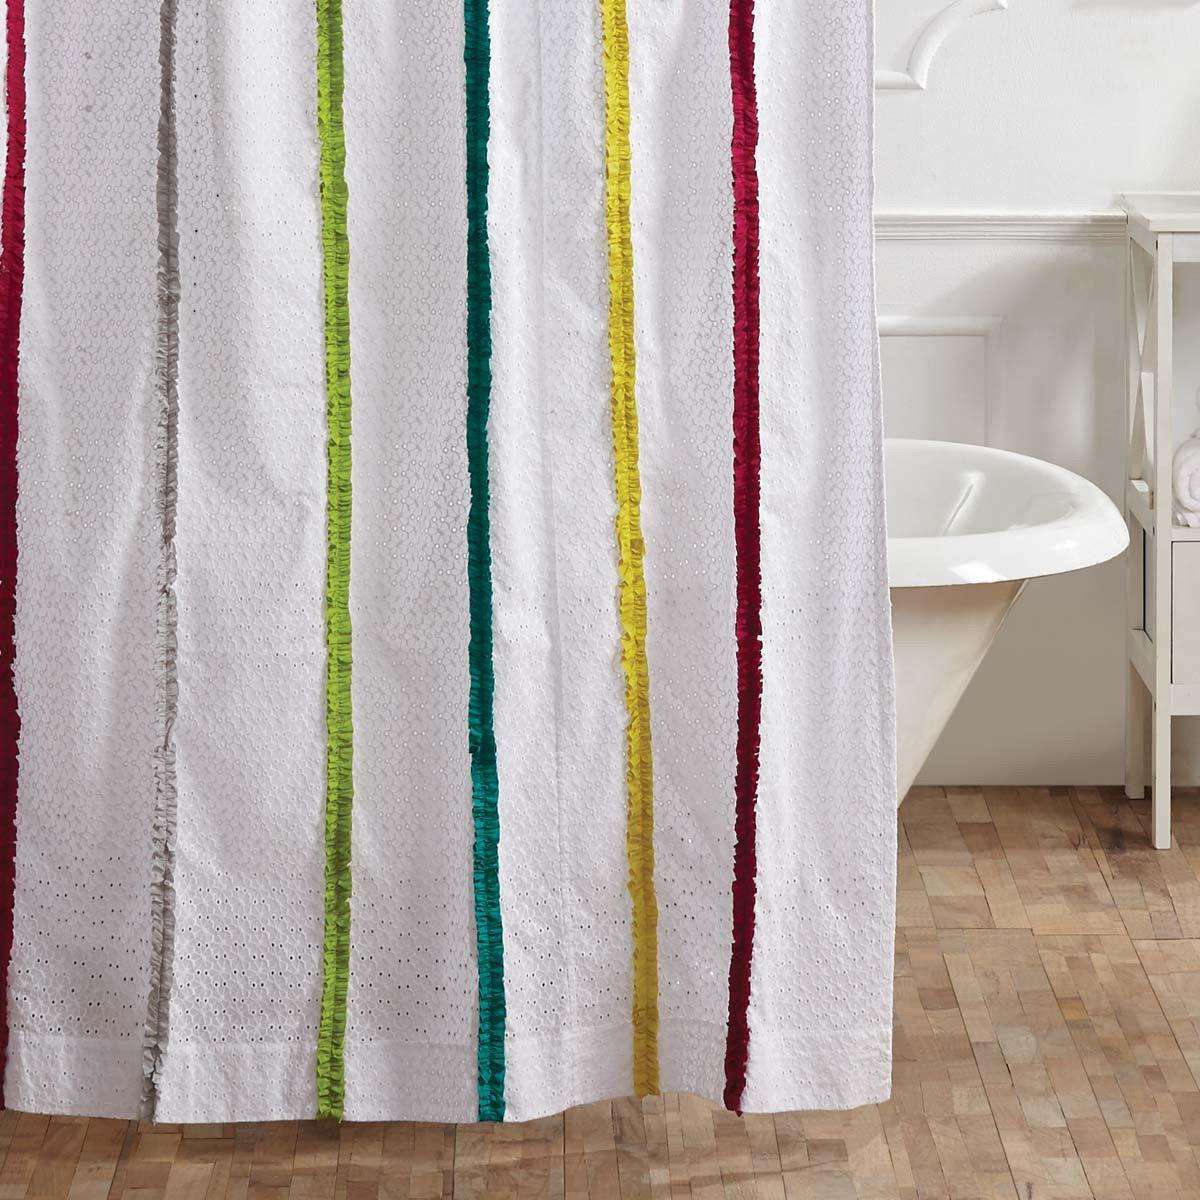 Everly Shower Curtain 72"x72" curtain VHC Brands 